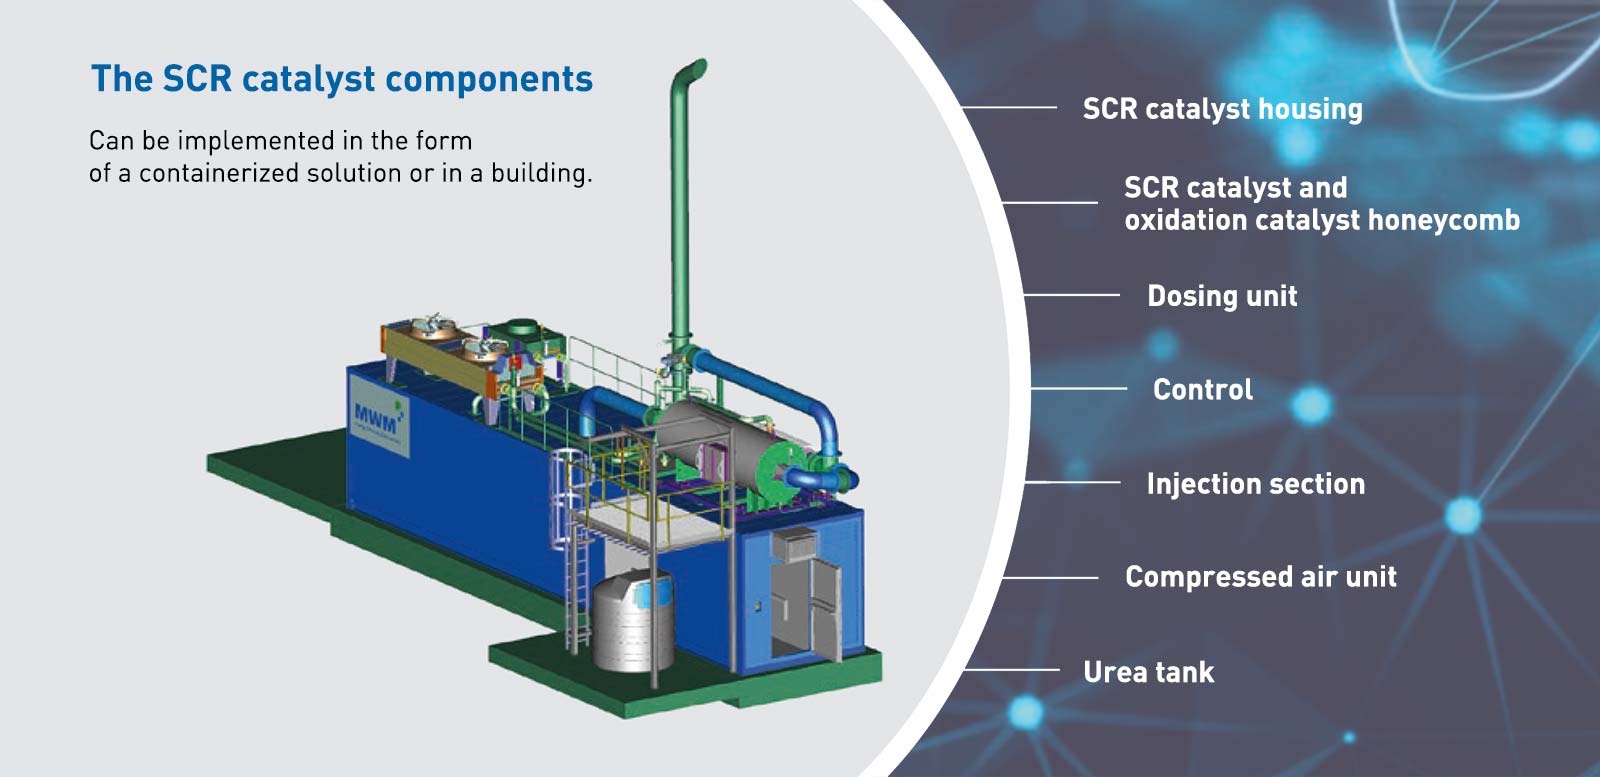 SCR catalyst components